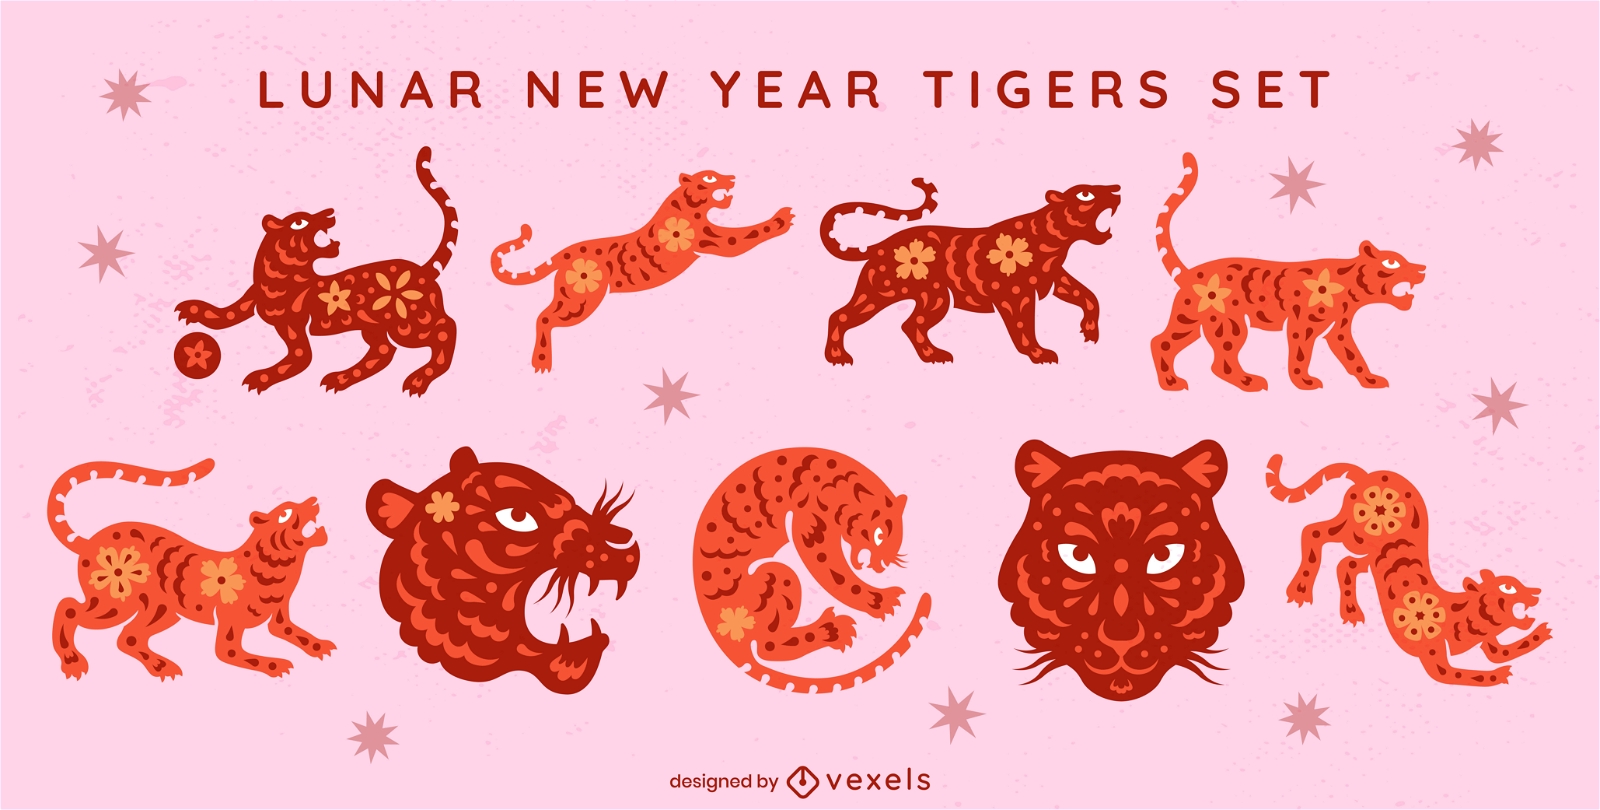 Lunar new year tigers character set